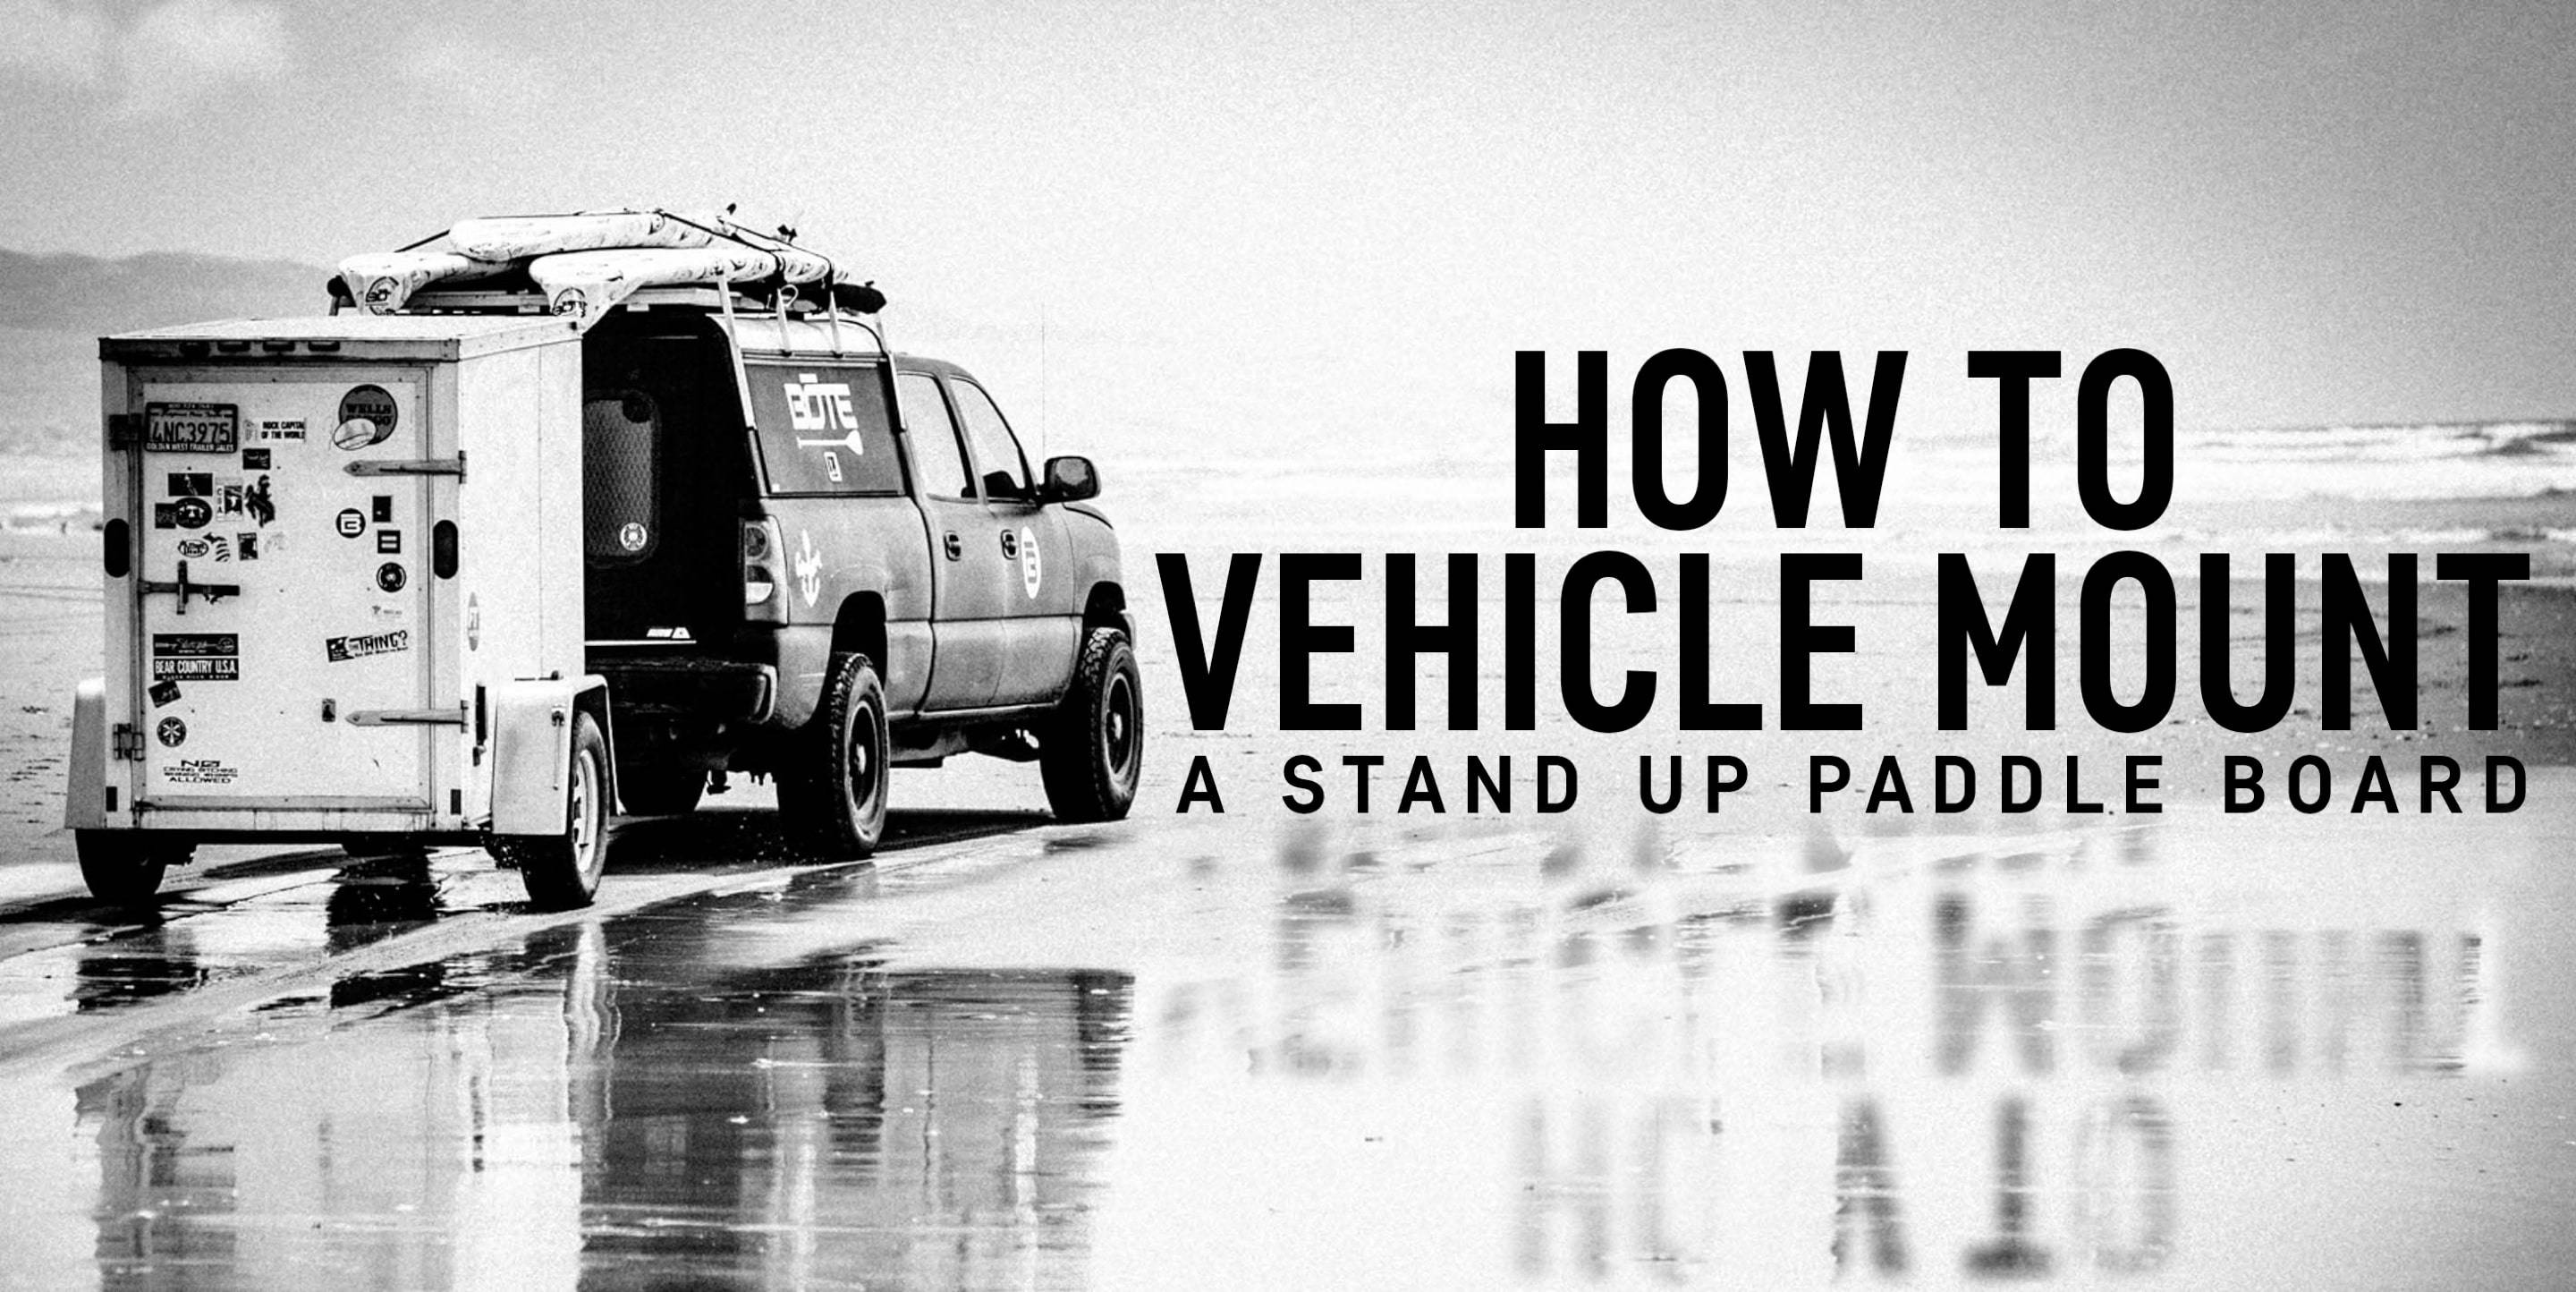 How to vehicle mount a stand up paddle board